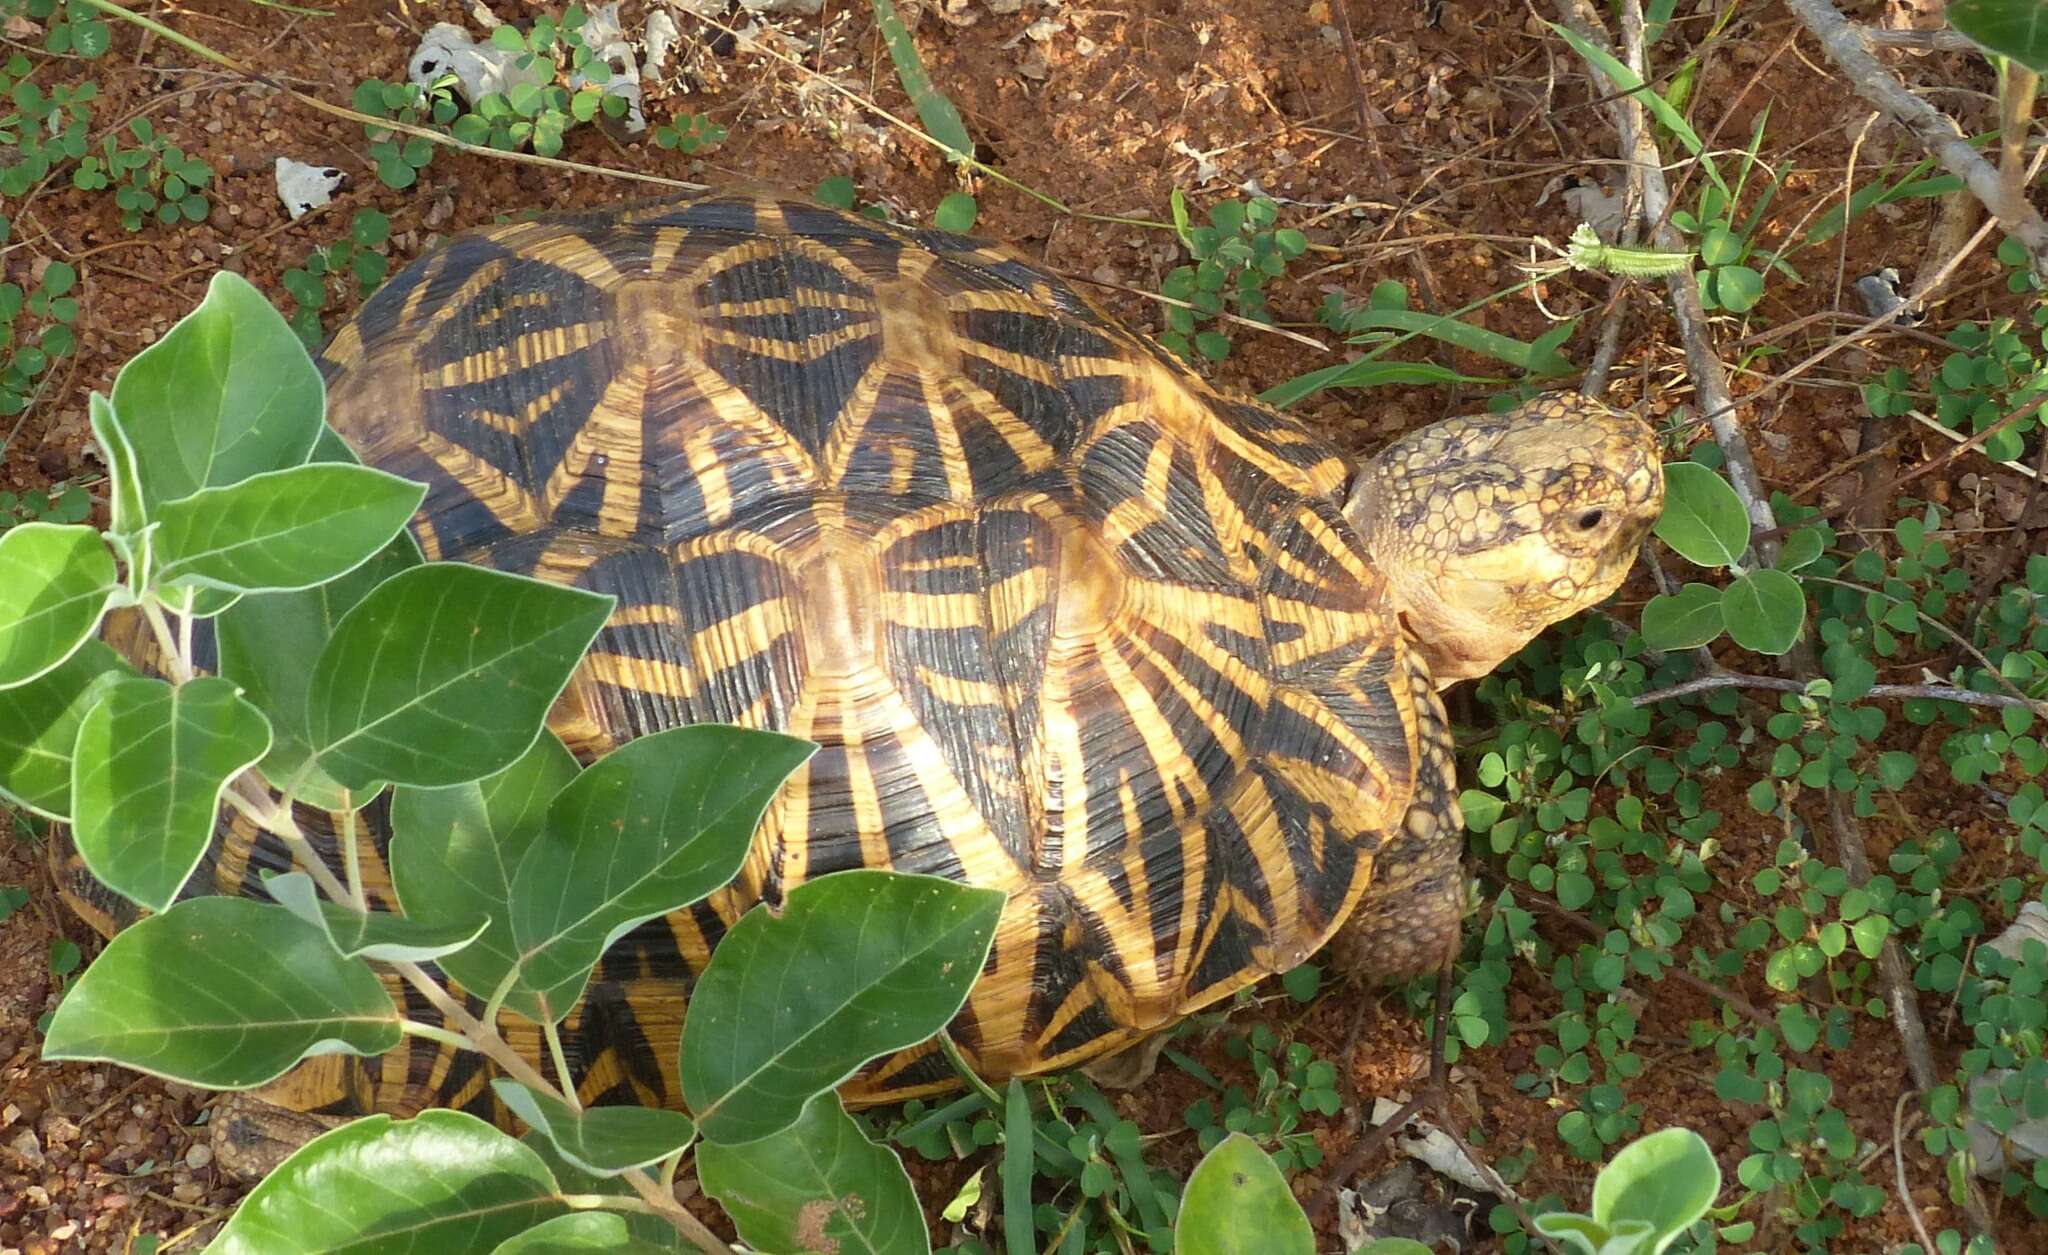 Image of Typical Tortoises